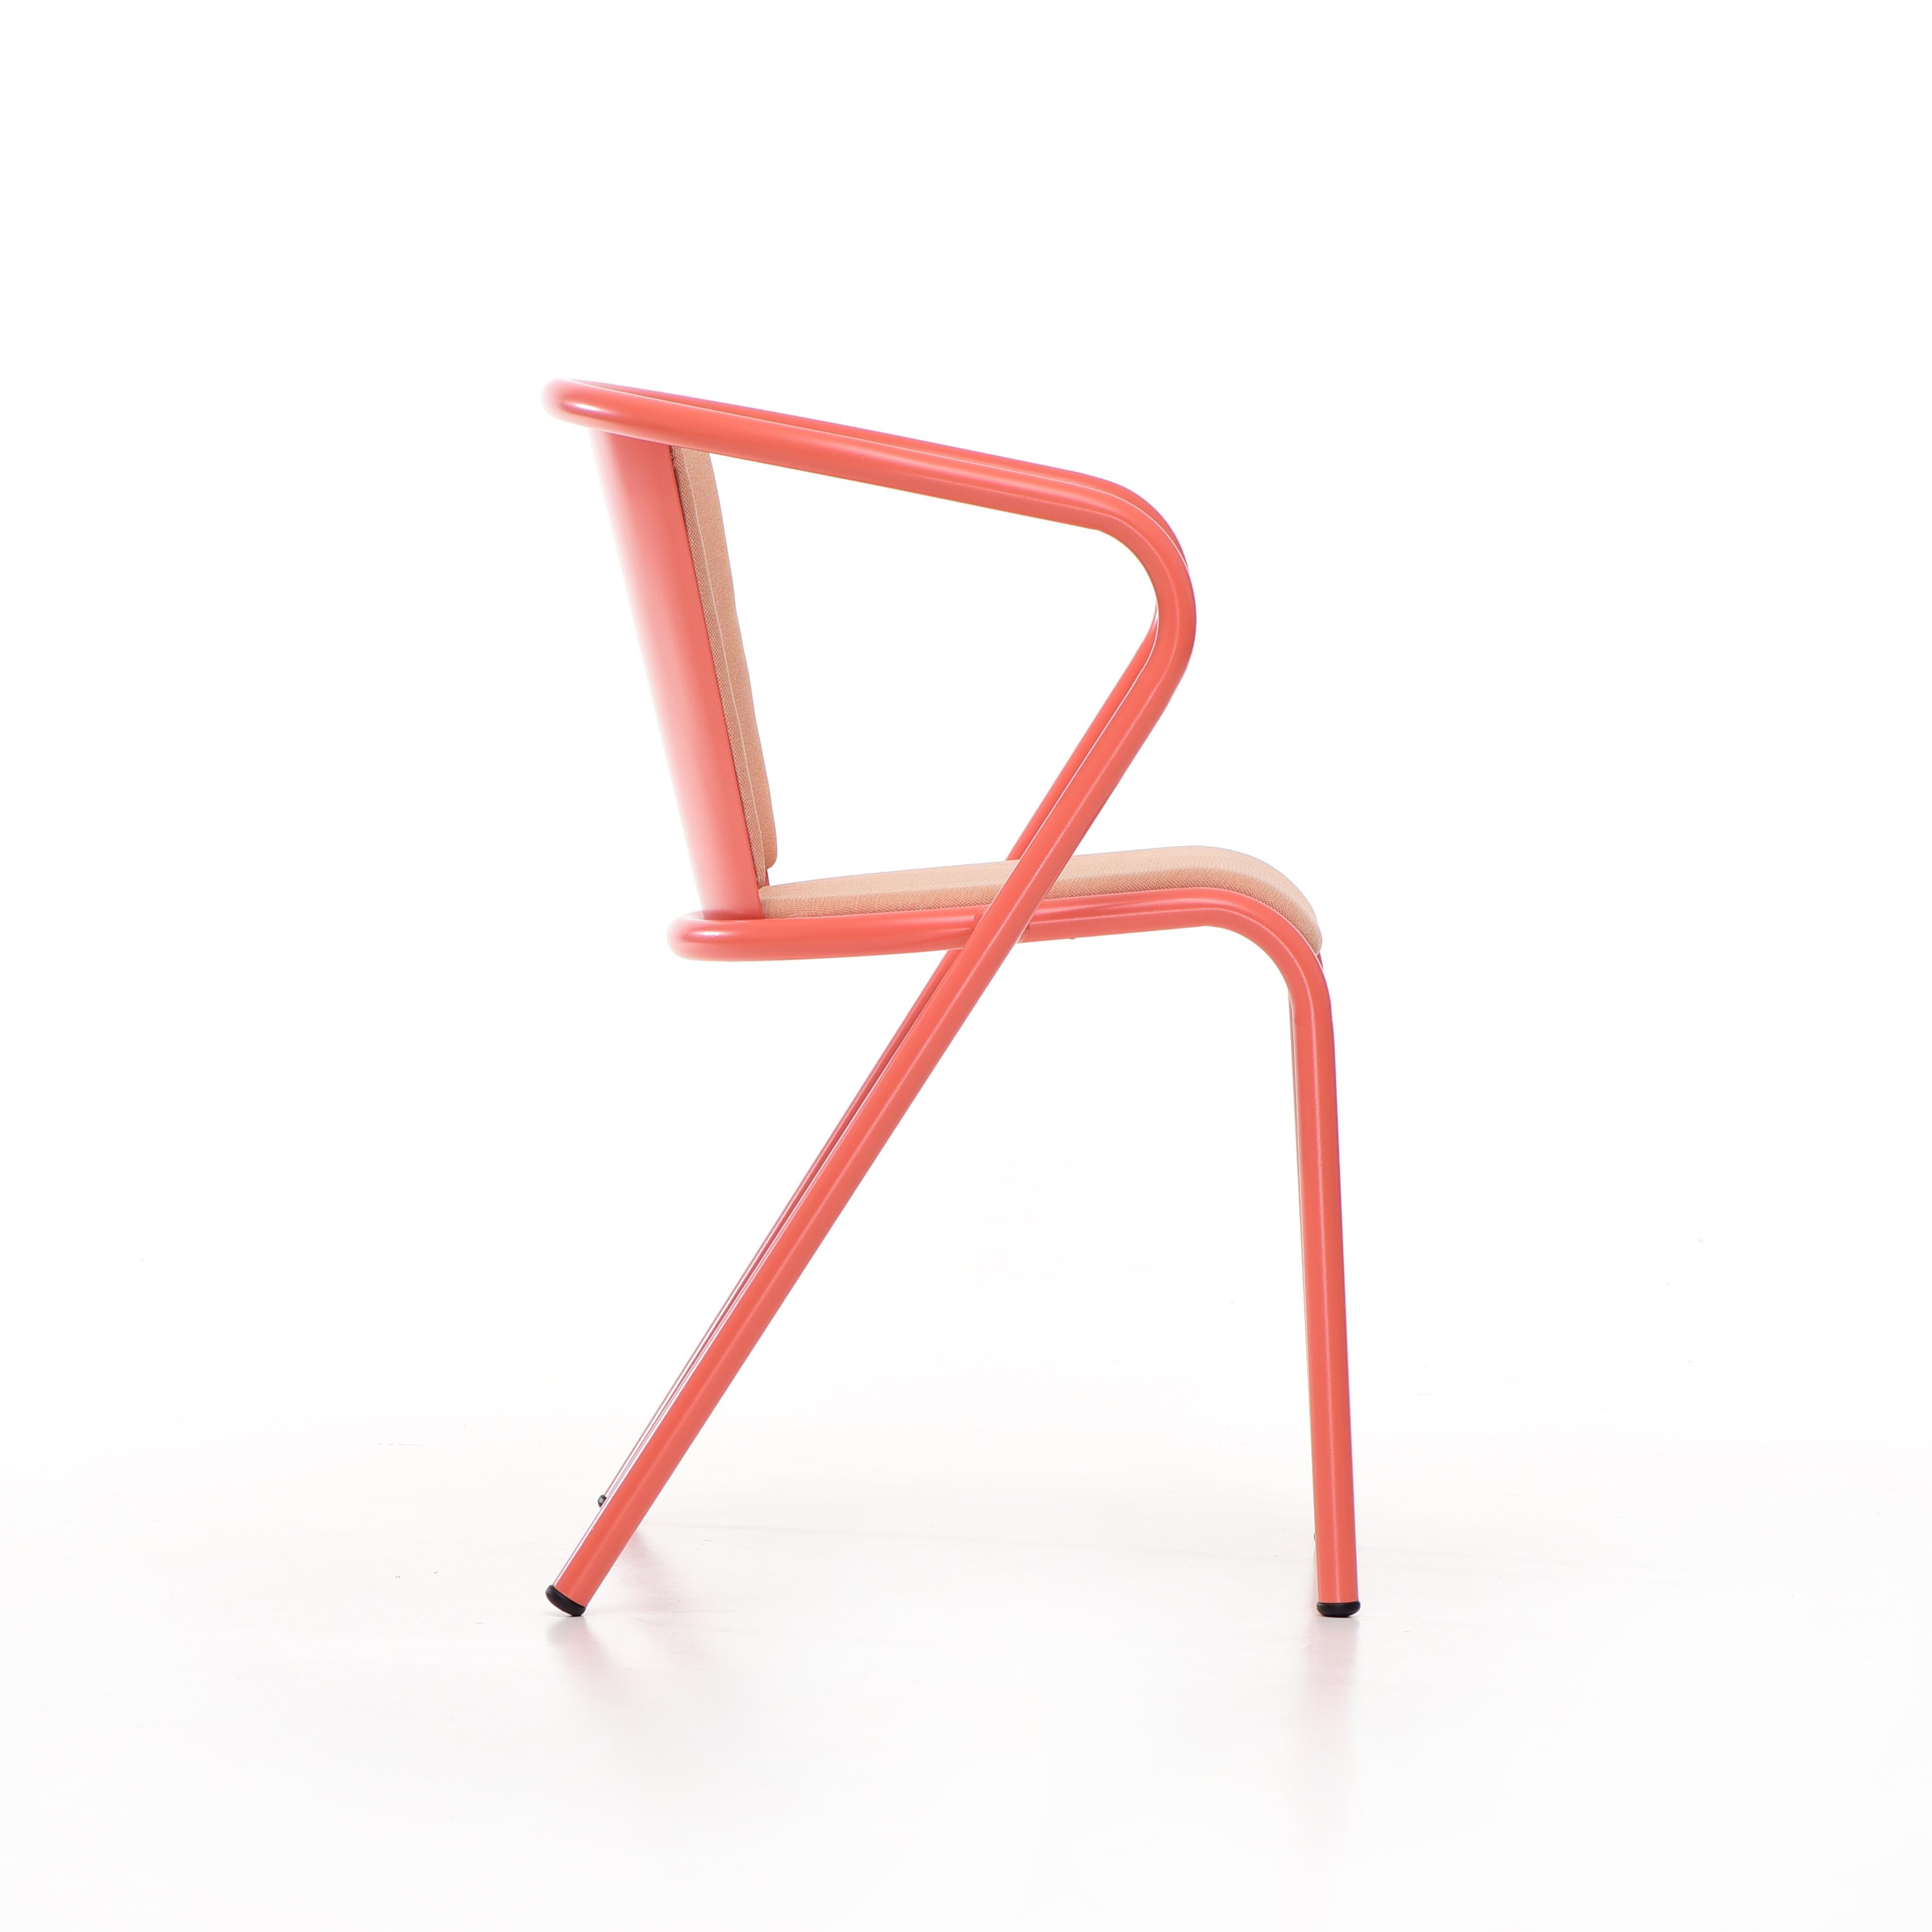 BICAchair is a sustainable stackable steel dining armchair made from recycled and recyclable steel, finished with our premium selection of powder-coating colors, in this case in a Pastel Reddish Pink color, that transforms a Classic in something new